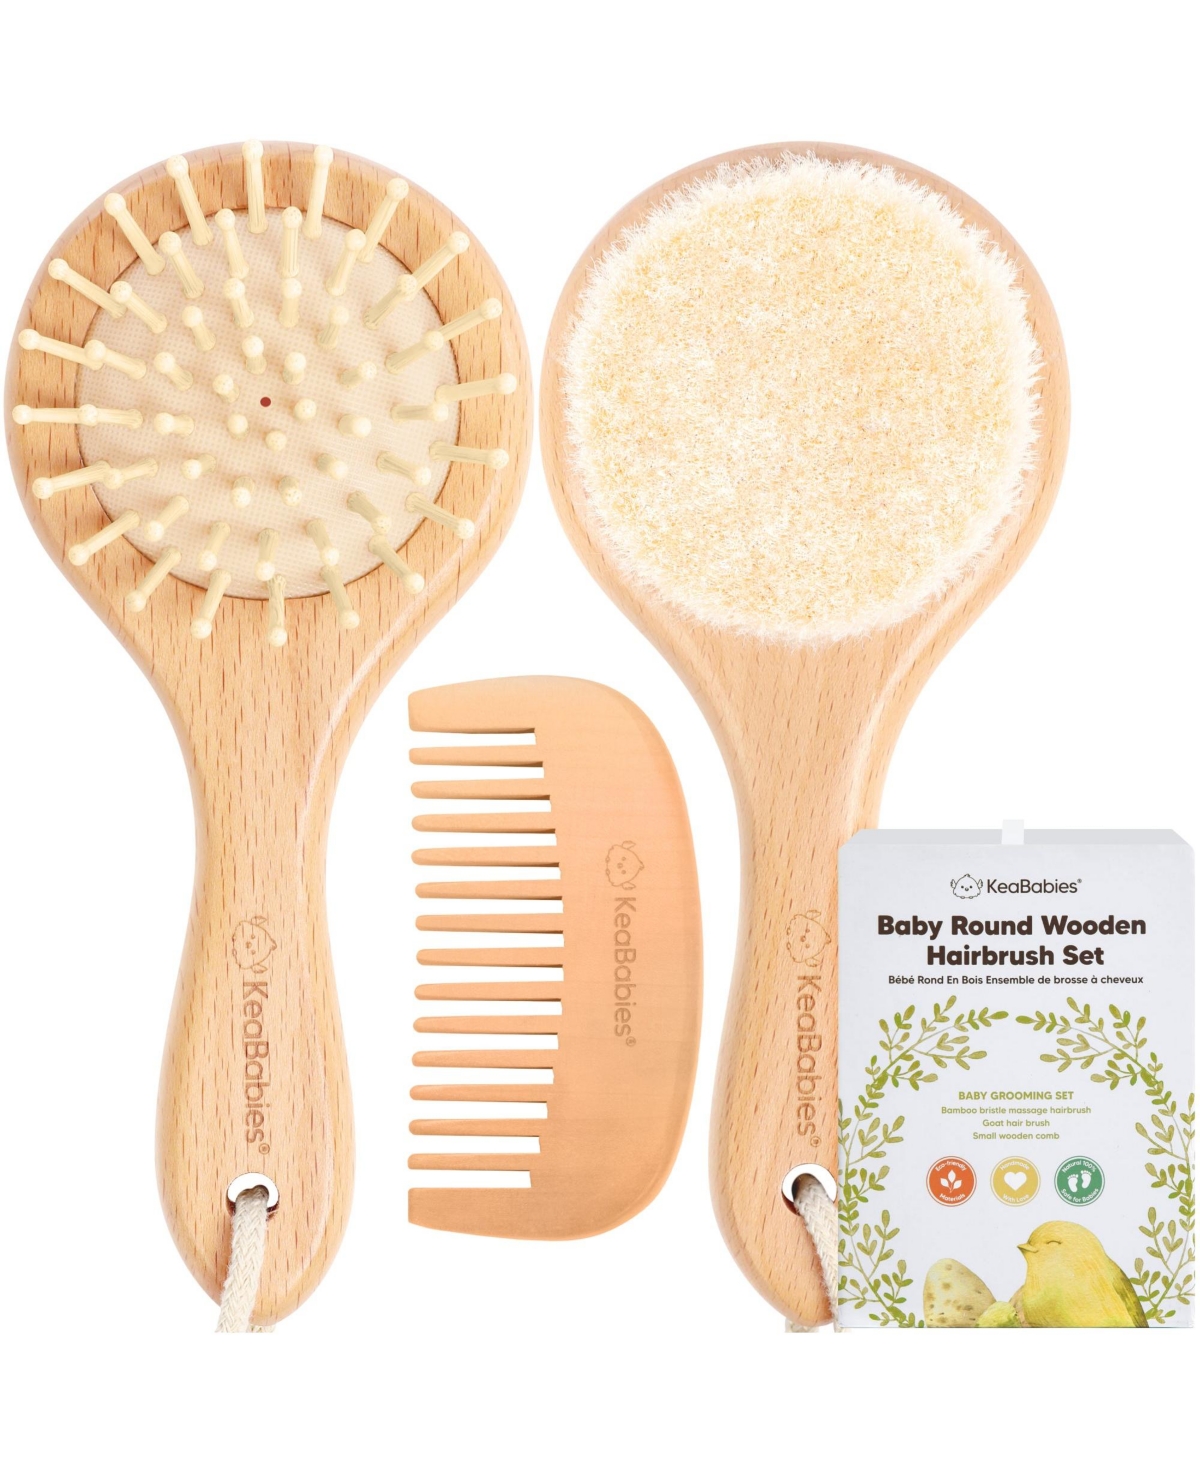 Keababies Baby Hair Brush And Comb Set, Round Wooden Baby Brush Set For Newborns, Infant, Toddler Grooming Kit In Walnut